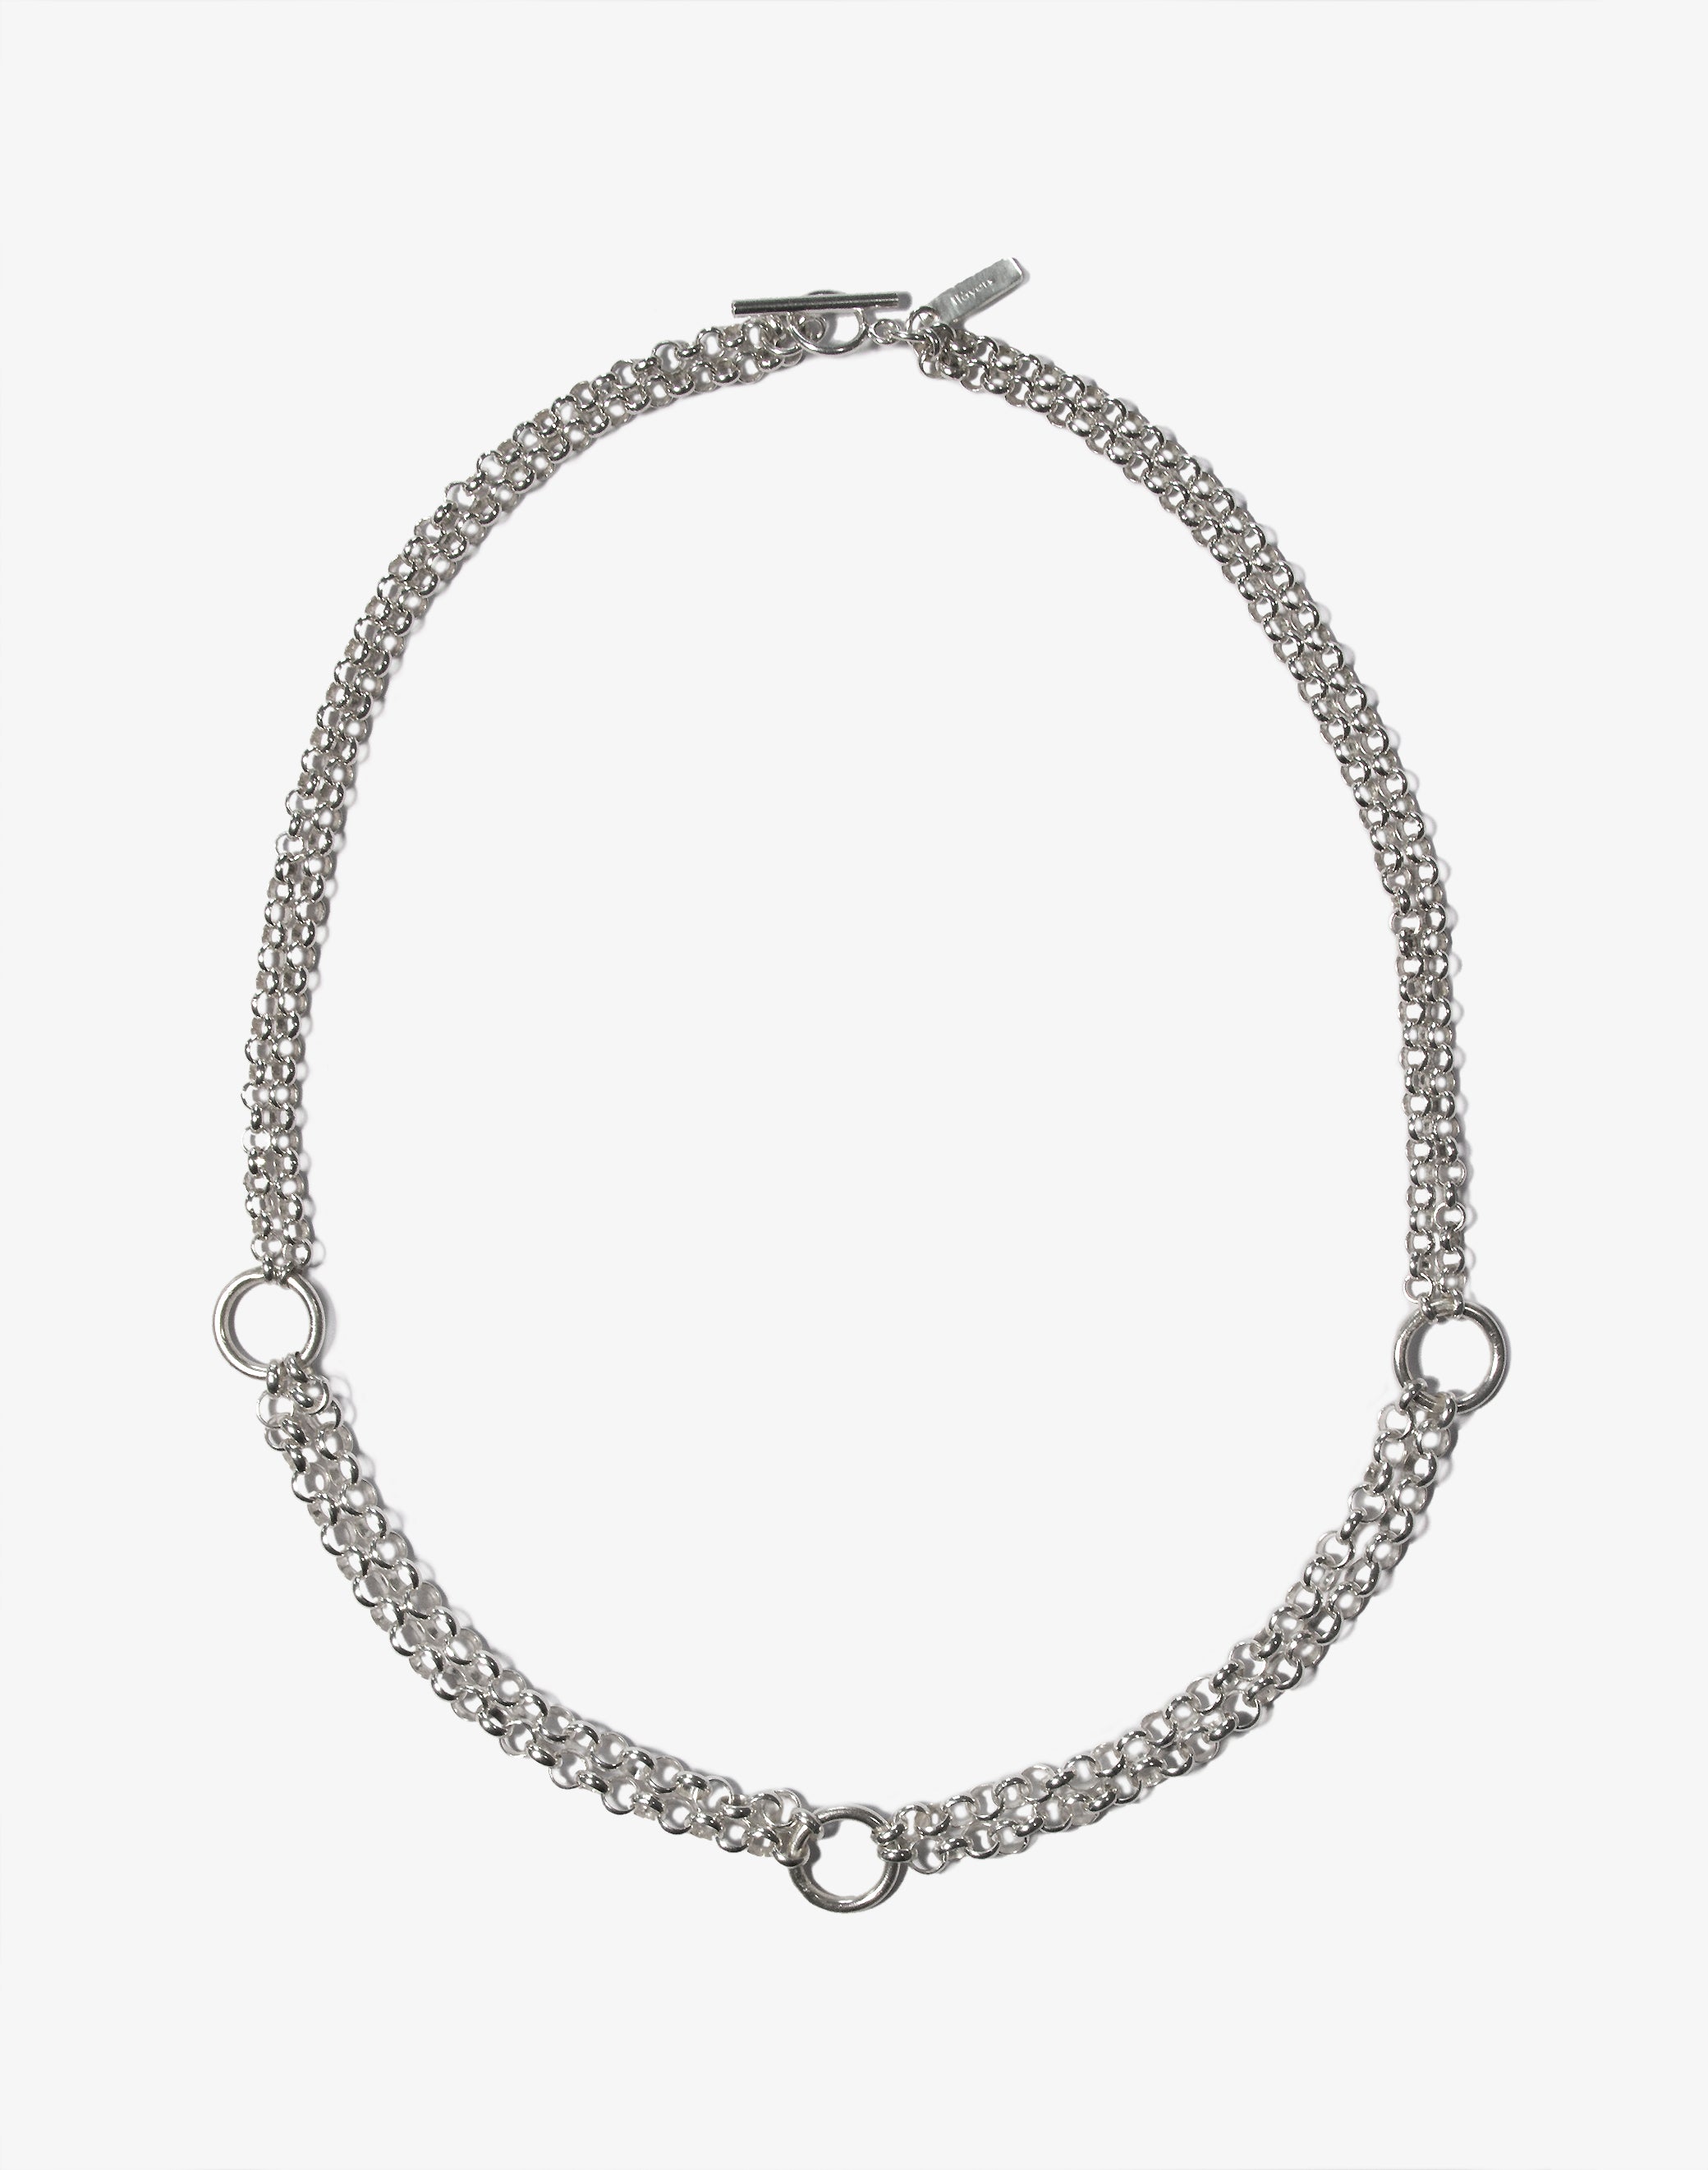 llayers jewelry Silver women long chain necklace choker handcrafted in New York 